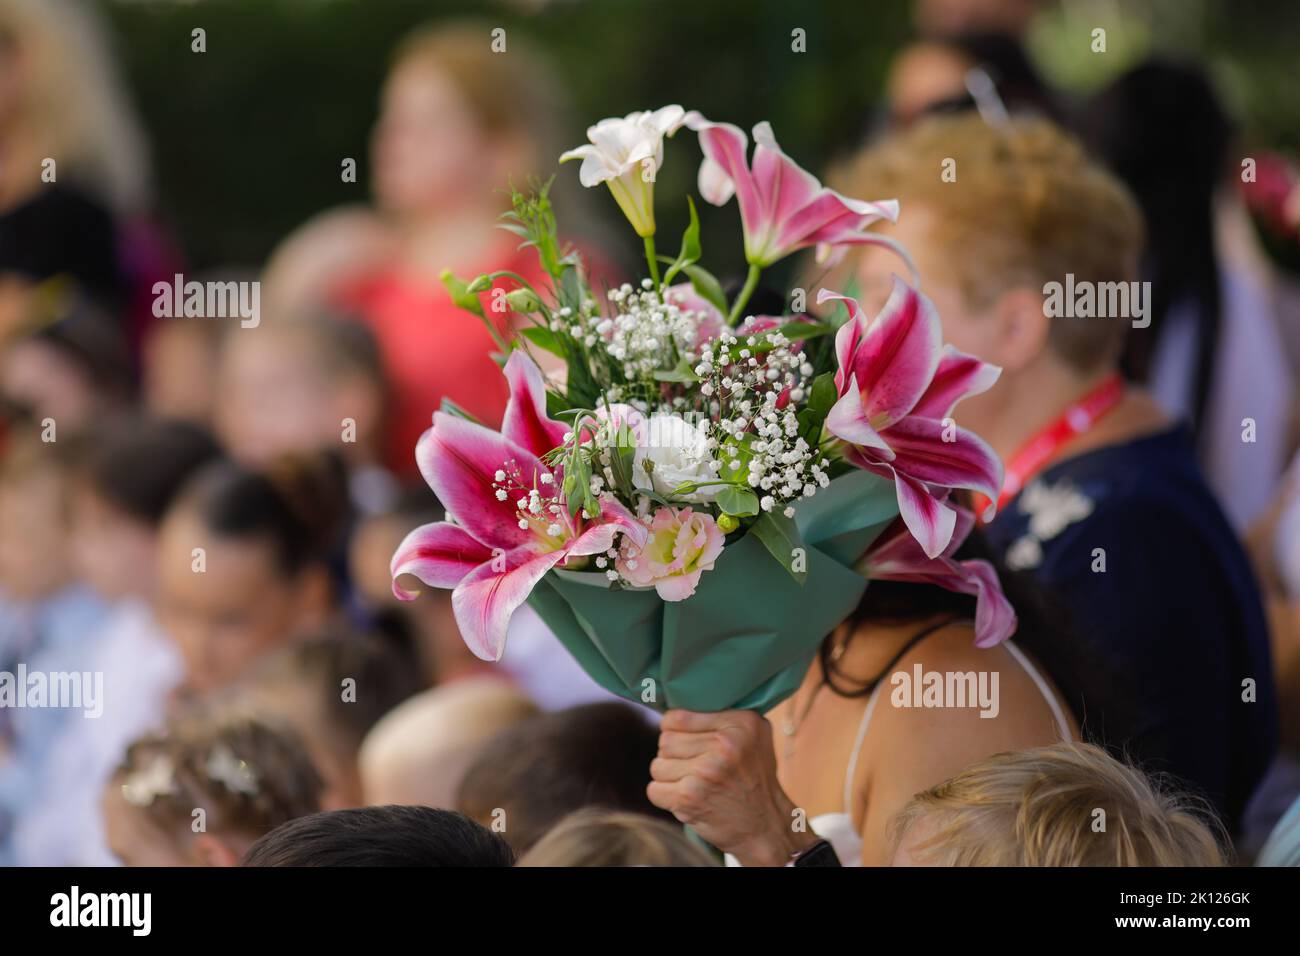 Shallow depth of field (selective focus) details with a woman holding flowers during the first day of school for her child. Stock Photo